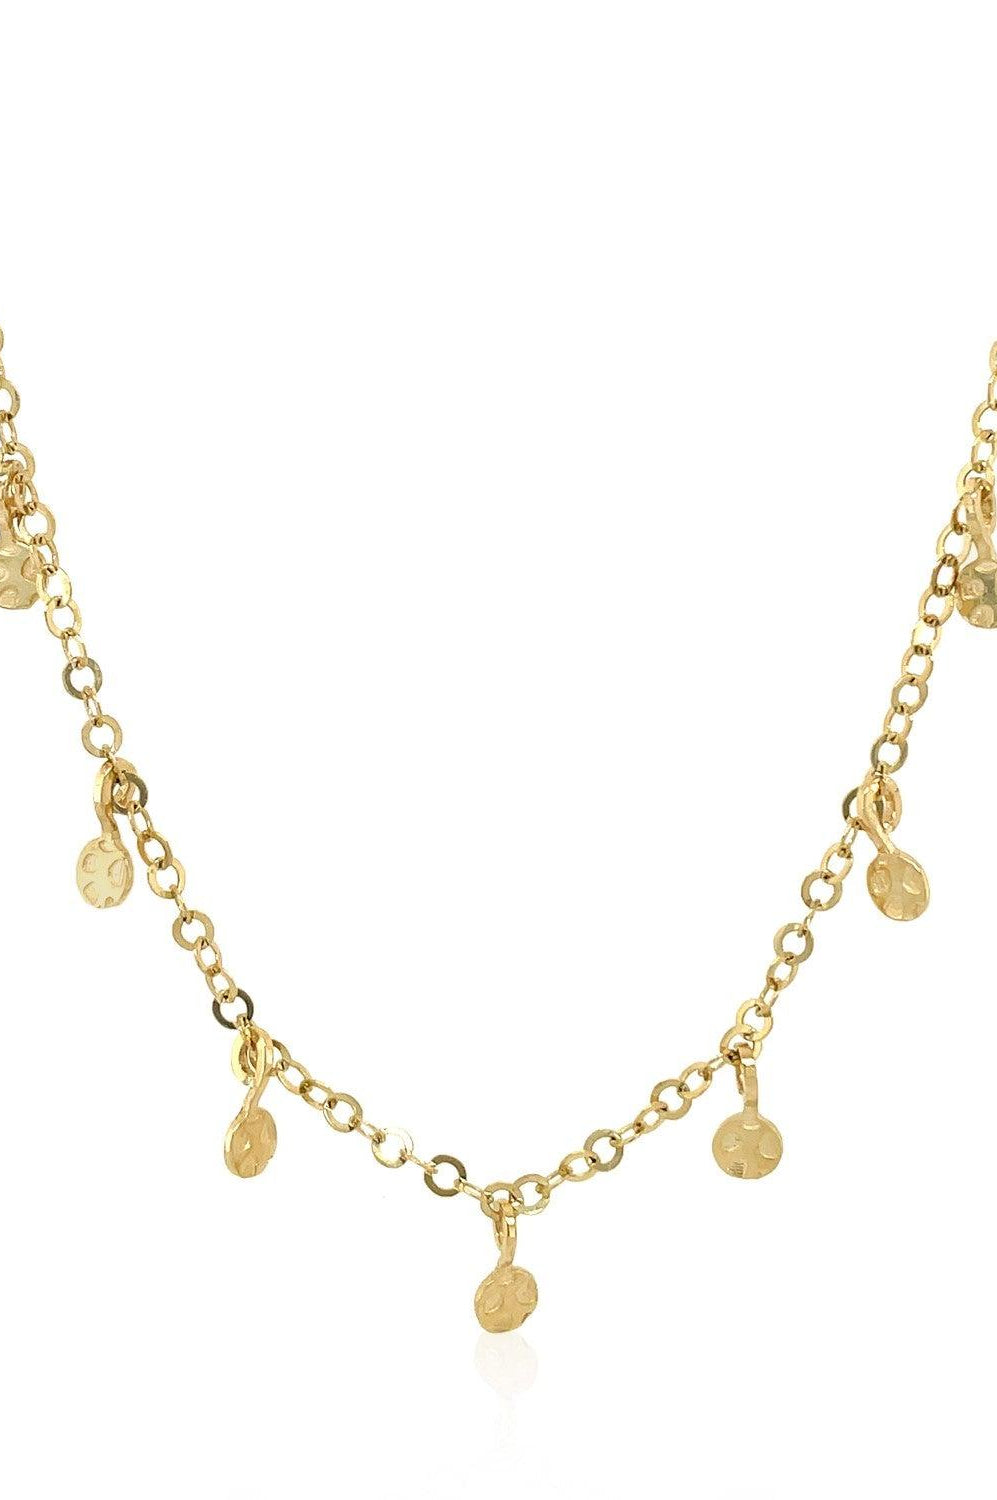 14k Solid Yellow Gold Hammered Bead Choker Necklace Luxoptions